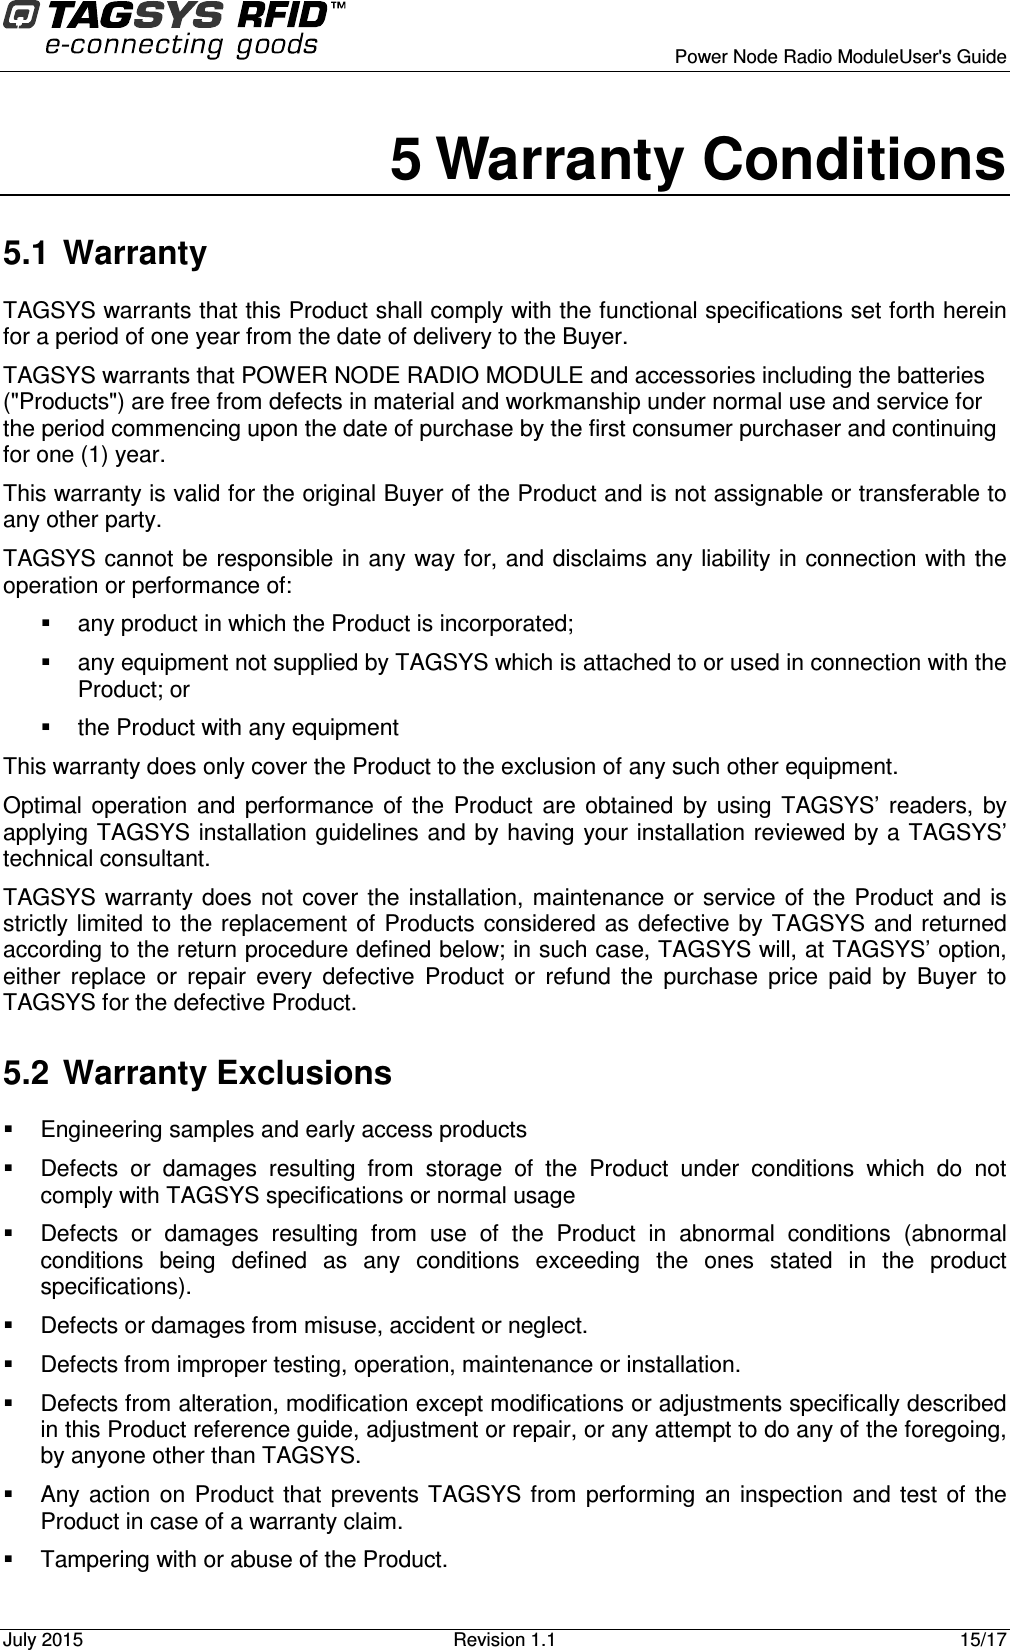      Power Node Radio ModuleUser&apos;s Guide July 2015  Revision 1.1  15/17  5 Warranty Conditions 5.1  Warranty TAGSYS warrants that this Product shall comply with the functional specifications set forth herein for a period of one year from the date of delivery to the Buyer. TAGSYS warrants that POWER NODE RADIO MODULE and accessories including the batteries (&quot;Products&quot;) are free from defects in material and workmanship under normal use and service for the period commencing upon the date of purchase by the first consumer purchaser and continuing for one (1) year.  This warranty is valid for the original Buyer of the Product and is not assignable or transferable to any other party. TAGSYS cannot be responsible in any way for, and disclaims any liability in connection with the operation or performance of:   any product in which the Product is incorporated;   any equipment not supplied by TAGSYS which is attached to or used in connection with the Product; or   the Product with any equipment This warranty does only cover the Product to the exclusion of any such other equipment. Optimal  operation  and  performance  of  the  Product  are  obtained  by  using  TAGSYS’  readers,  by applying TAGSYS installation guidelines and by having your installation reviewed by a TAGSYS’ technical consultant. TAGSYS warranty  does not  cover the  installation,  maintenance  or service  of  the  Product  and is strictly limited to the  replacement of  Products considered as  defective by TAGSYS and returned according to the return procedure defined below; in such case, TAGSYS will, at TAGSYS’ option, either  replace  or  repair  every  defective  Product  or  refund  the  purchase  price  paid  by  Buyer  to TAGSYS for the defective Product. 5.2  Warranty Exclusions   Engineering samples and early access products   Defects  or  damages  resulting  from  storage  of  the  Product  under  conditions  which  do  not comply with TAGSYS specifications or normal usage   Defects  or  damages  resulting  from  use  of  the  Product  in  abnormal  conditions  (abnormal conditions  being  defined  as  any  conditions  exceeding  the  ones  stated  in  the  product specifications).   Defects or damages from misuse, accident or neglect.   Defects from improper testing, operation, maintenance or installation.   Defects from alteration, modification except modifications or adjustments specifically described in this Product reference guide, adjustment or repair, or any attempt to do any of the foregoing, by anyone other than TAGSYS.   Any action  on  Product  that  prevents  TAGSYS from  performing  an  inspection  and test  of  the Product in case of a warranty claim.   Tampering with or abuse of the Product. 